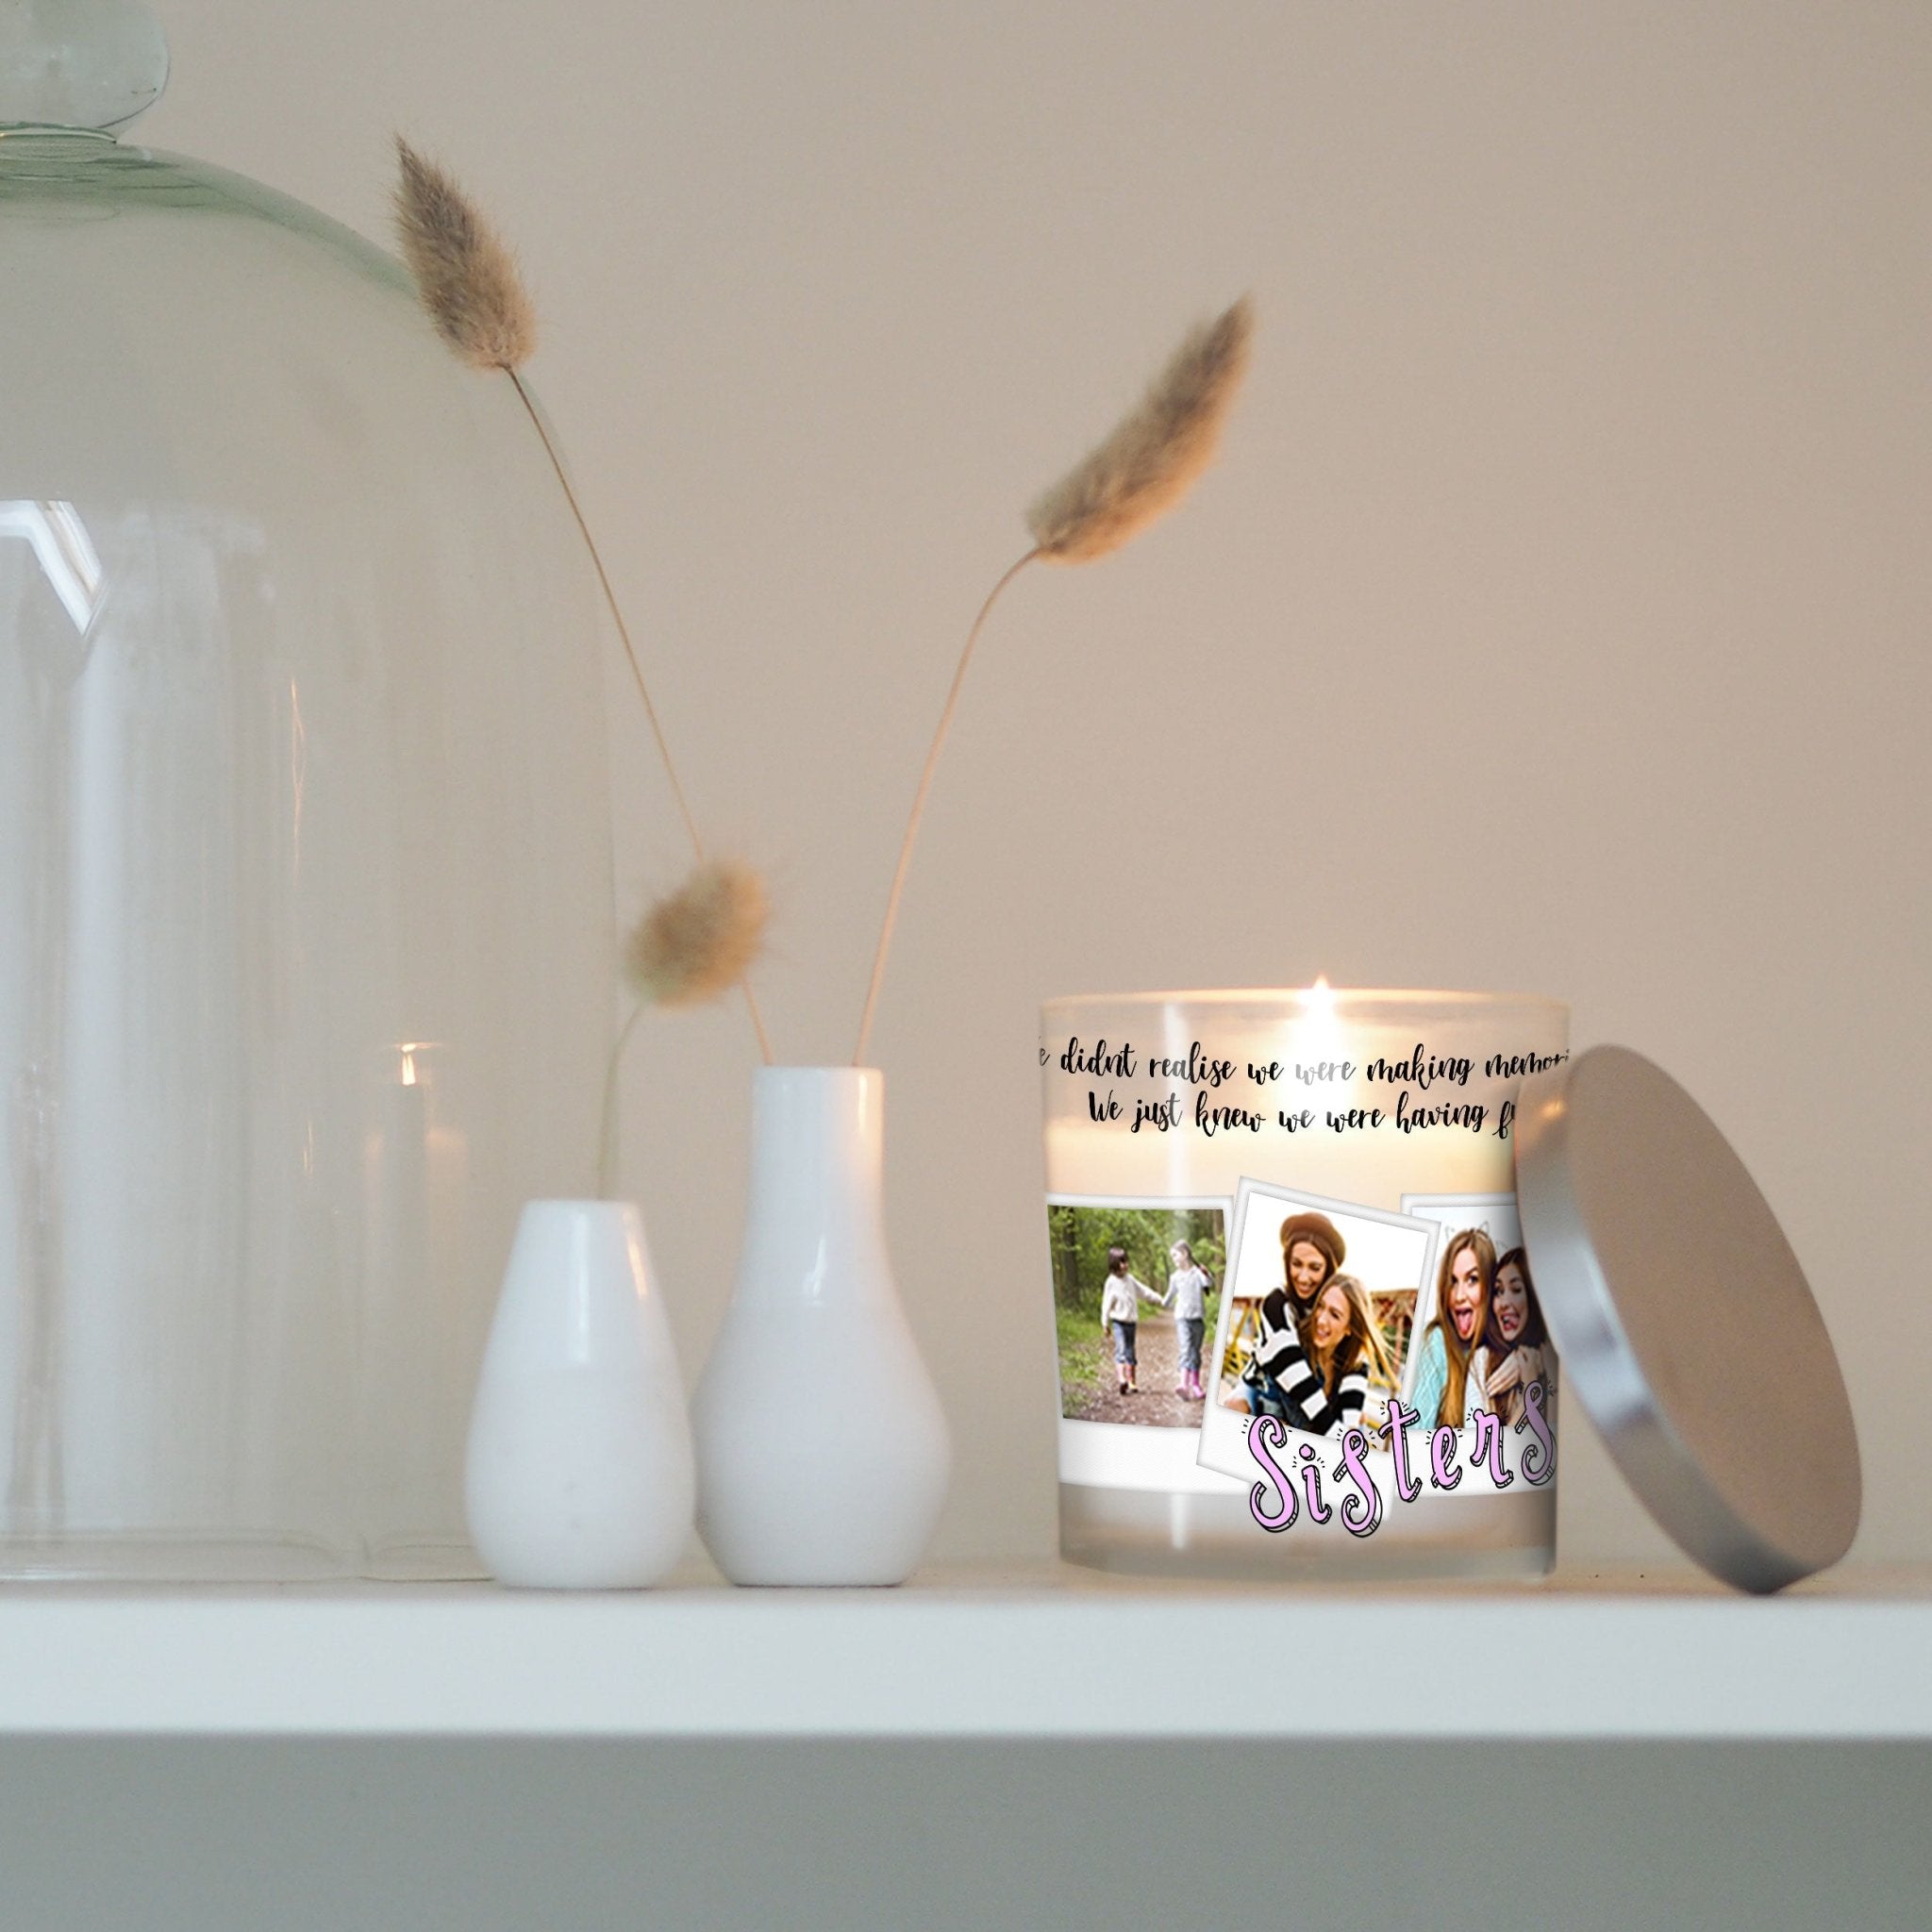 Sisters Custom Photo Candle Holder | Bride Gift Ideas from Sis | Girl Siblings Personalized Votive Glass with Picture | Home Decor Present Candleholder - Unique Prints